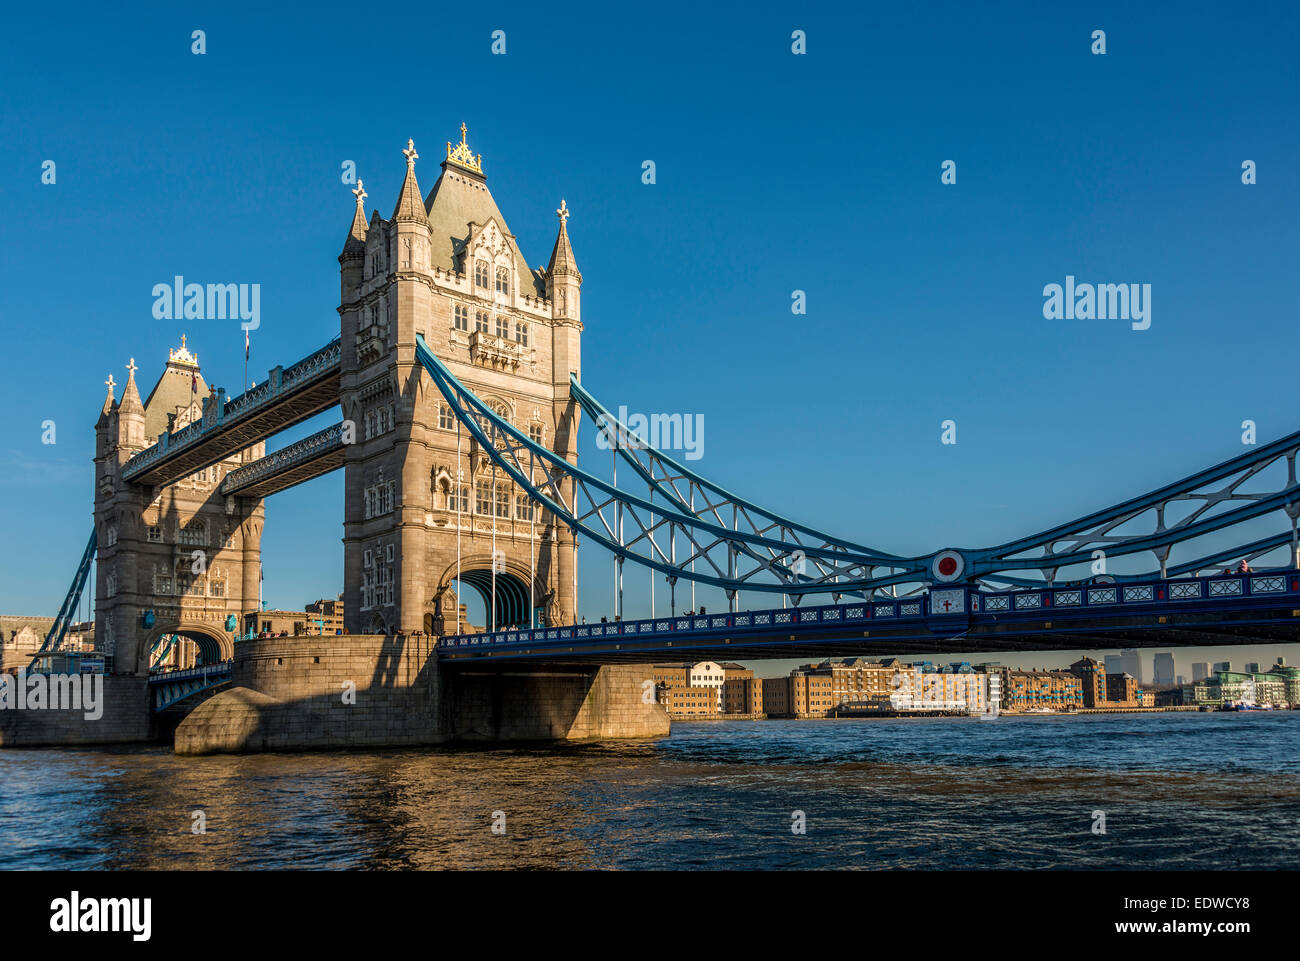 Tower Bridge is a famous landmark, an iconic suspension bridge spanning the River Thames in London Stock Photo